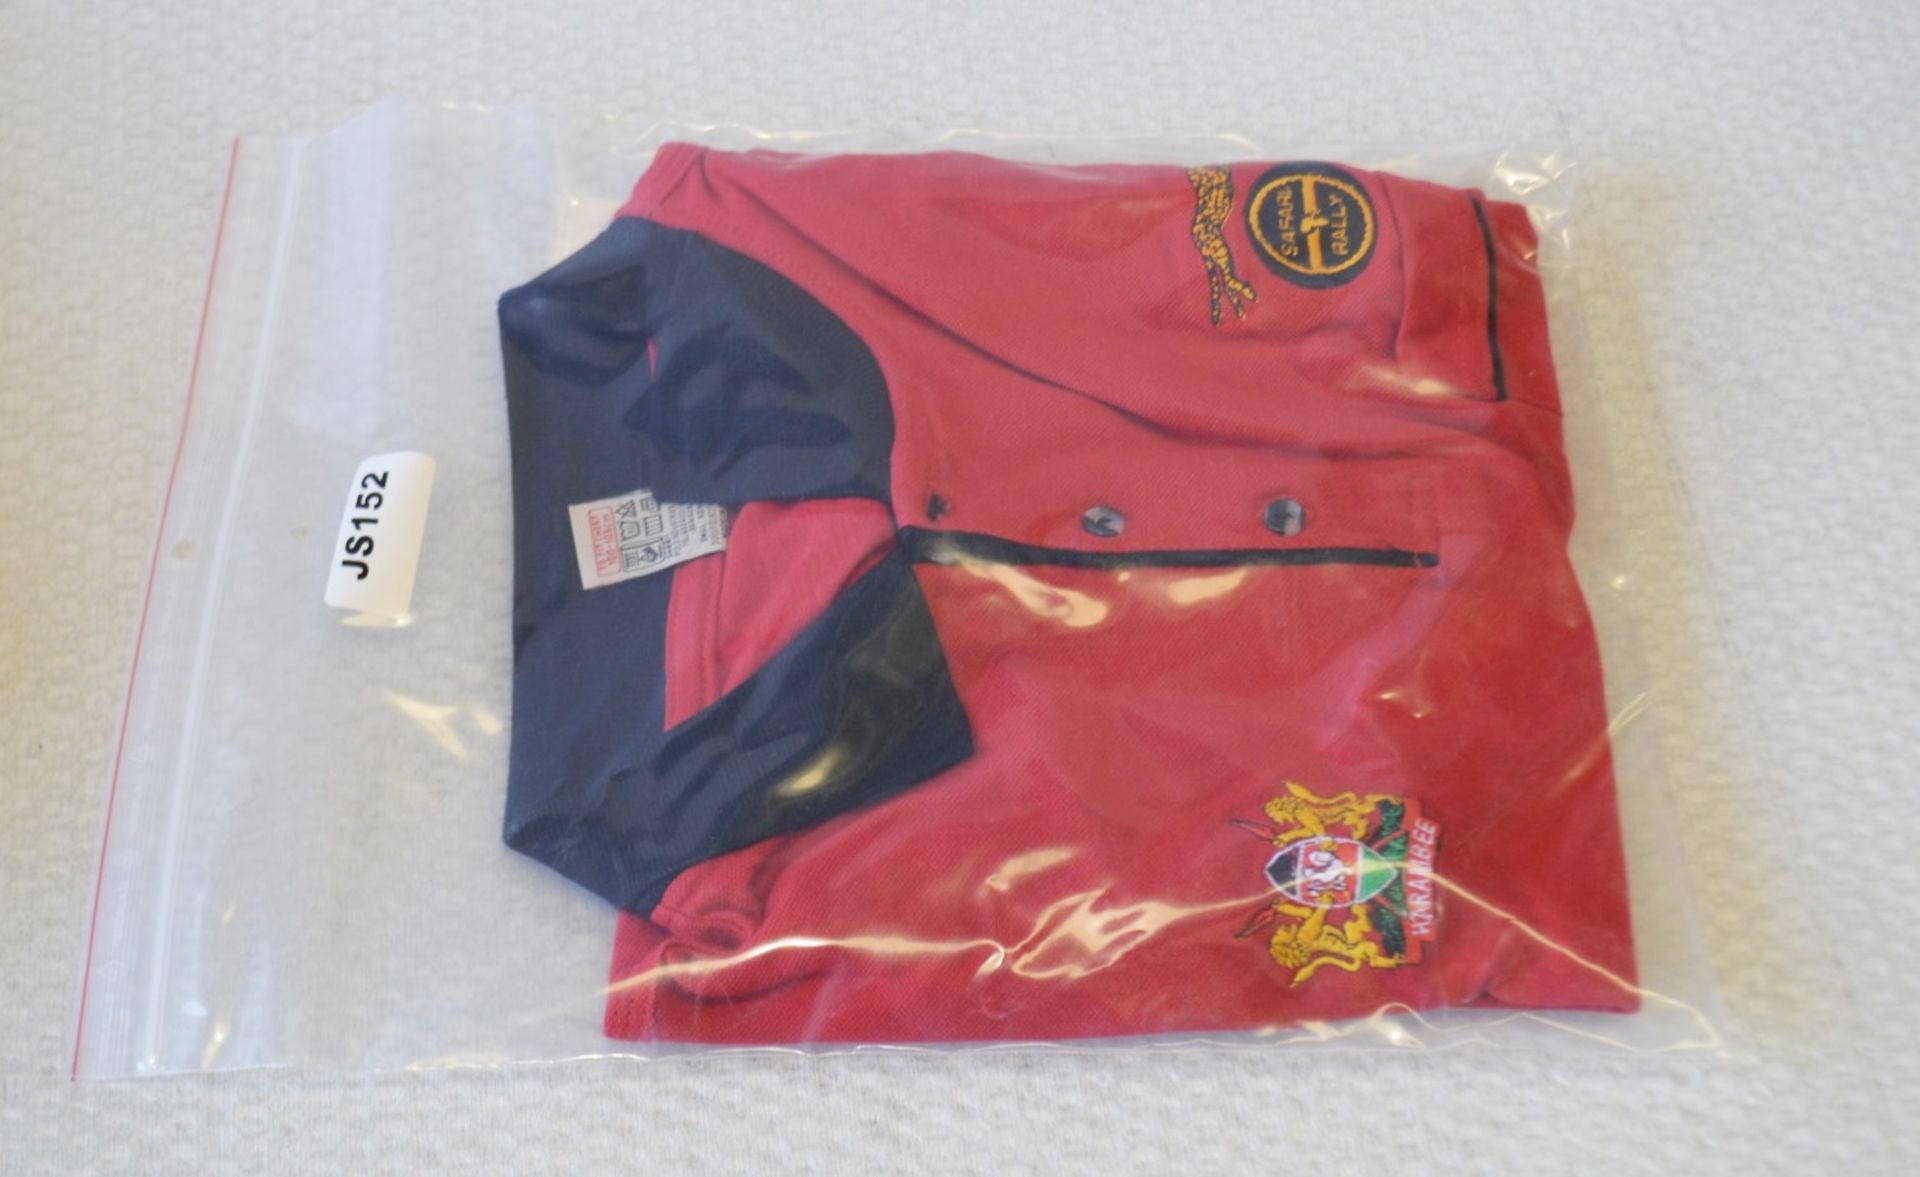 1 x Men's Genuine Poloknit Polo Shirt In Red 'WRC Safari Rally Project' - Size (EU/UK): L/L - Image 8 of 8